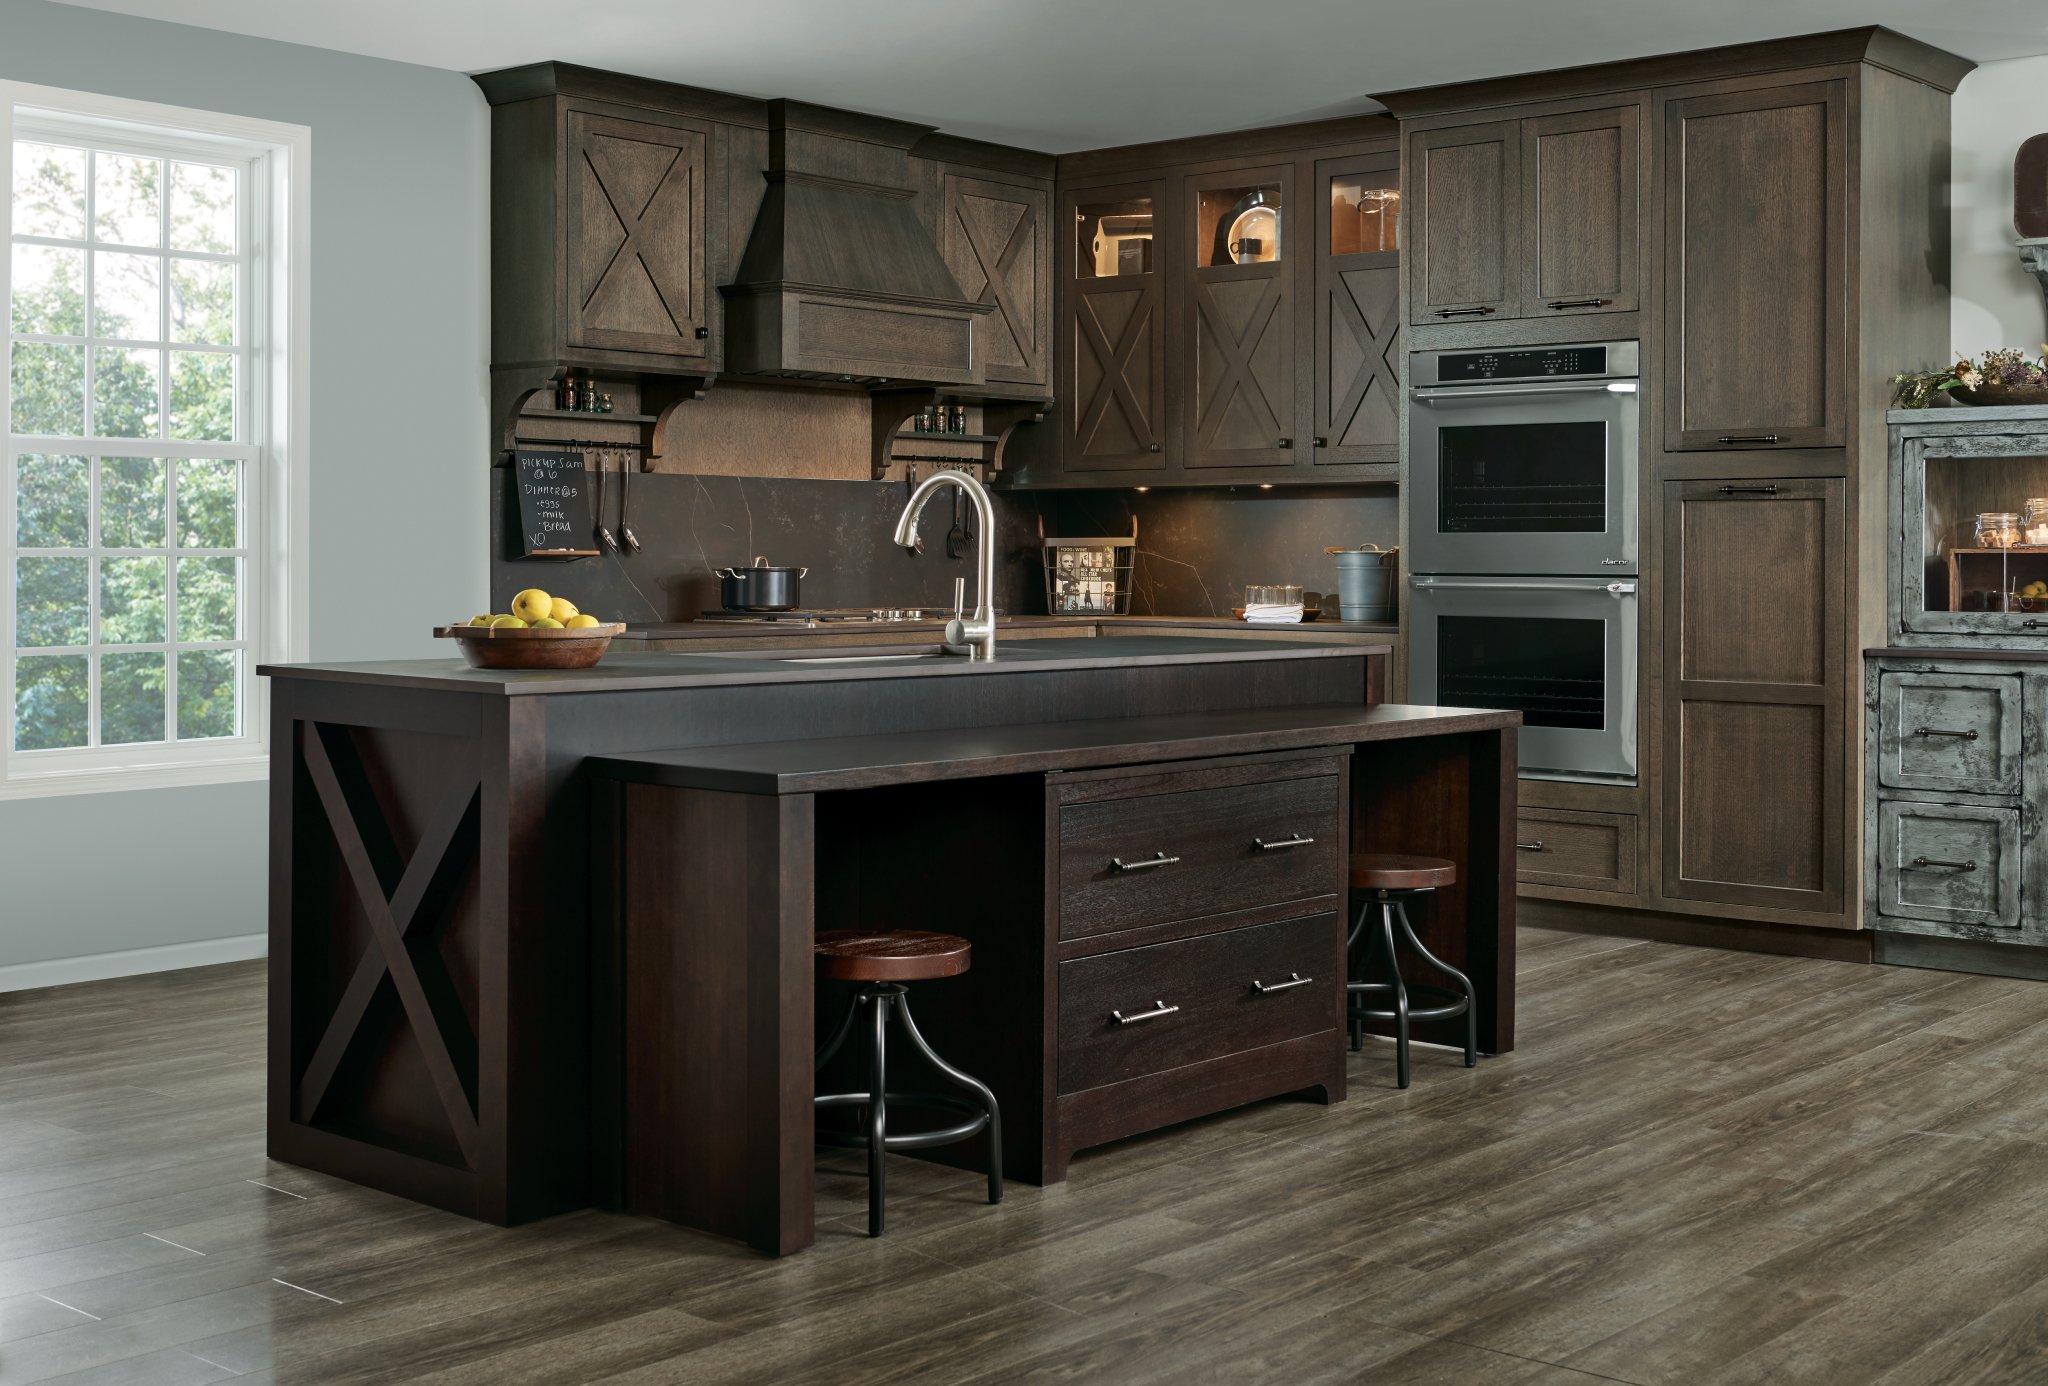 Kitchens cabinets- The new attractions: